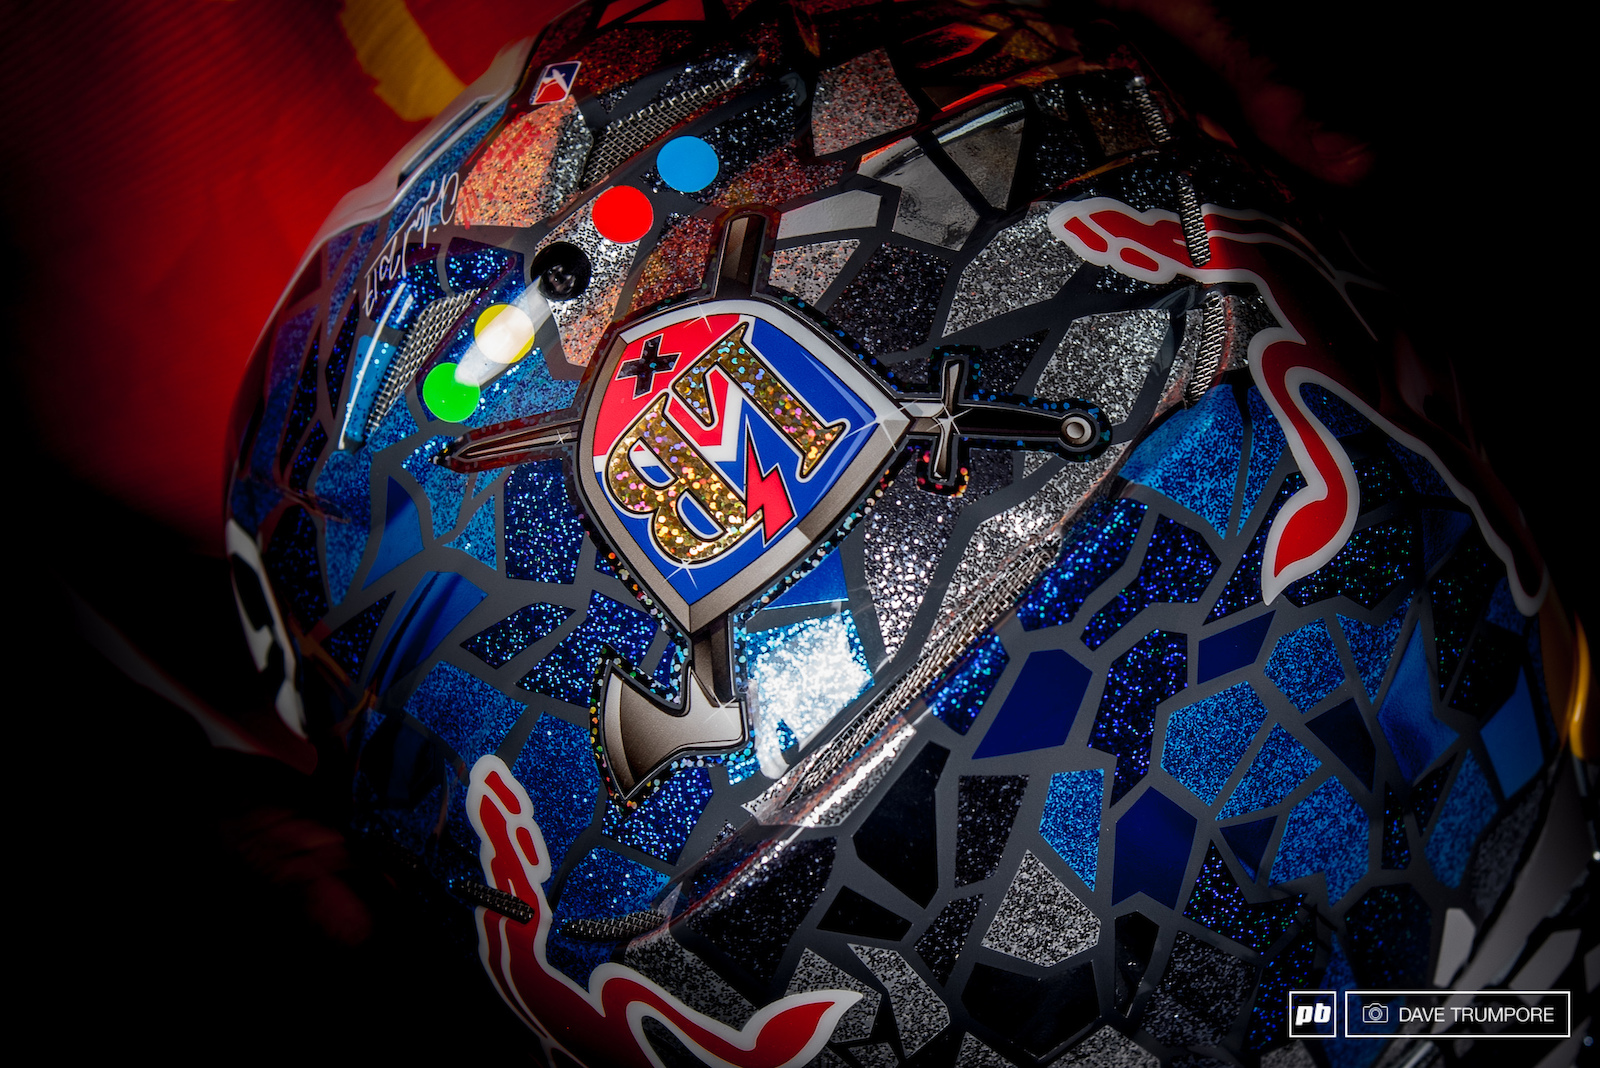 Something shiny and new for Loic Bruni.